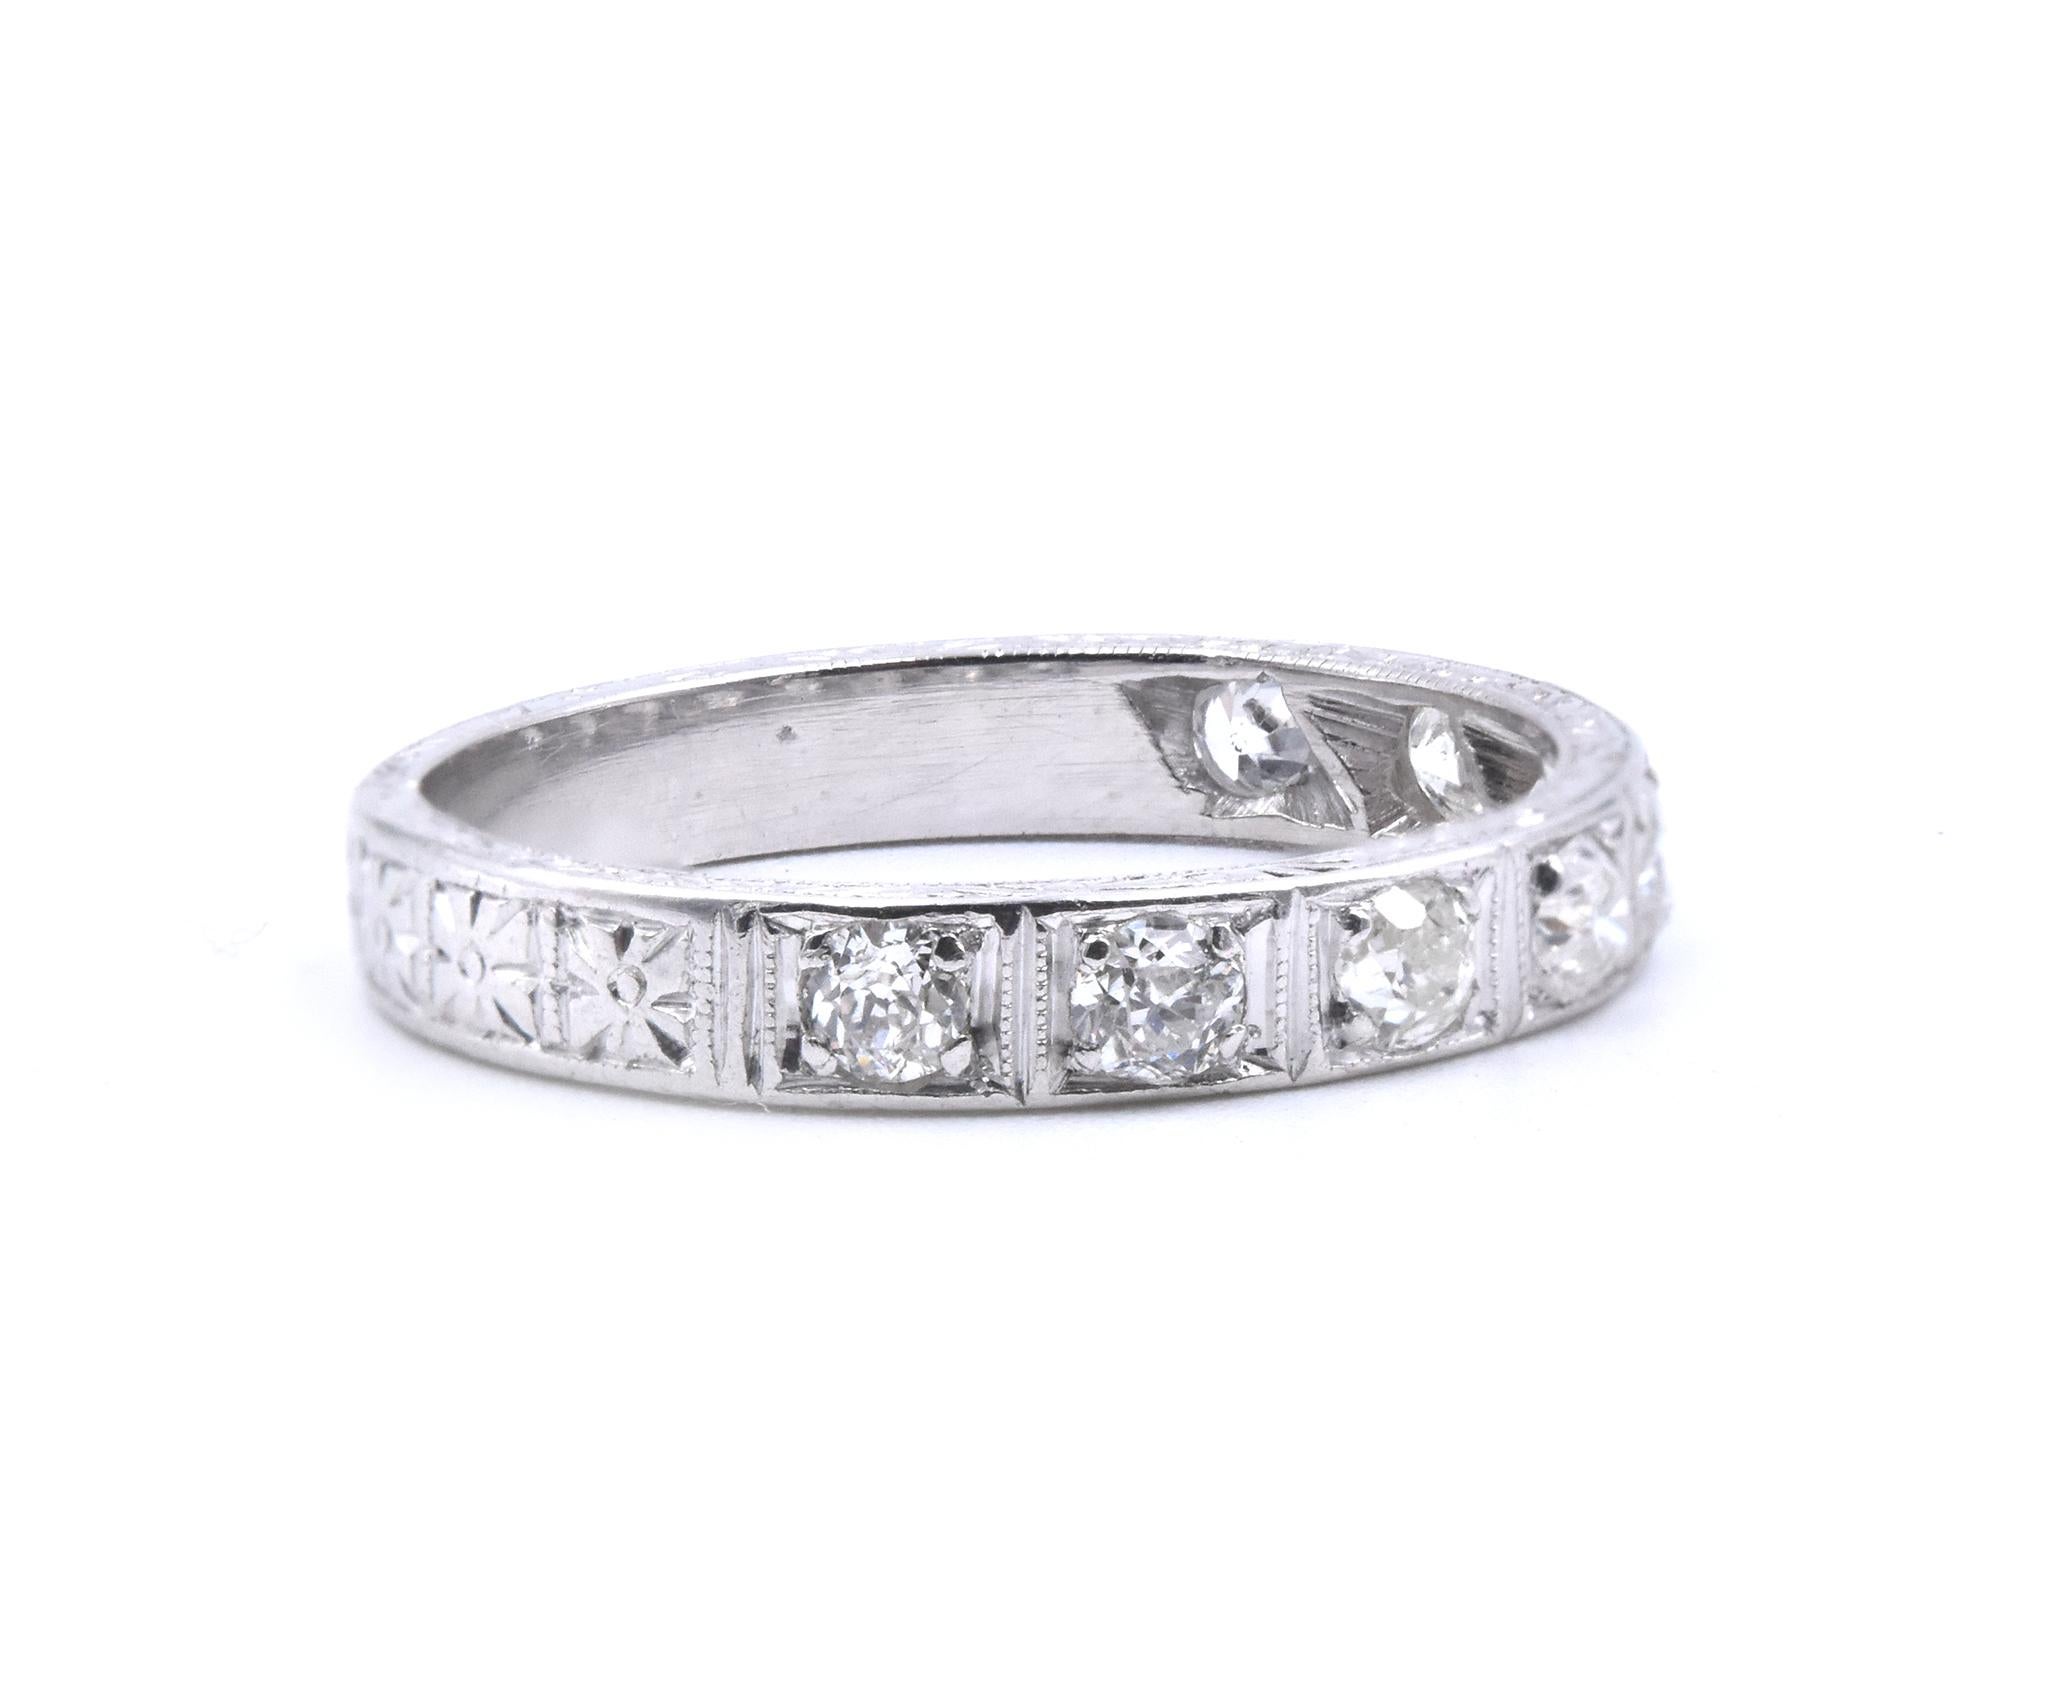 Material: Platinum 
Diamonds: 8 round brilliant cut = 0.50cttw
Color: G
Clarity: SI1
Ring Size: 7 (please allow up to 2 additional business days for sizing requests)
Dimensions: ring measures 3.25mm wide
Weight: 3.97 grams